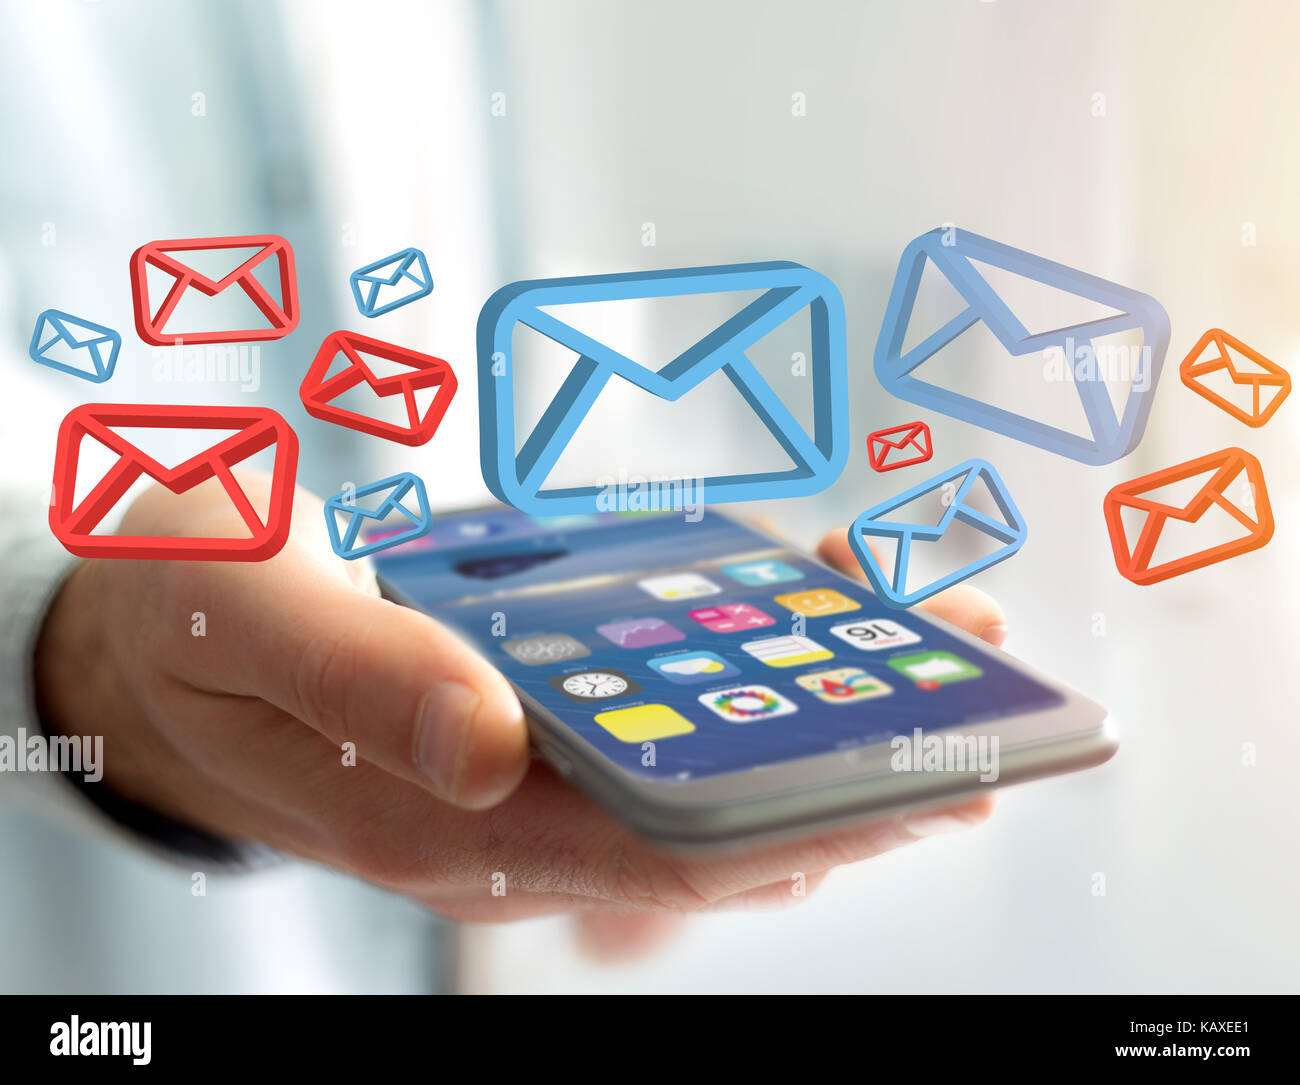 View of Approved email and spam message displayed on a futuristic interface - Message and internet concept Stock Photo